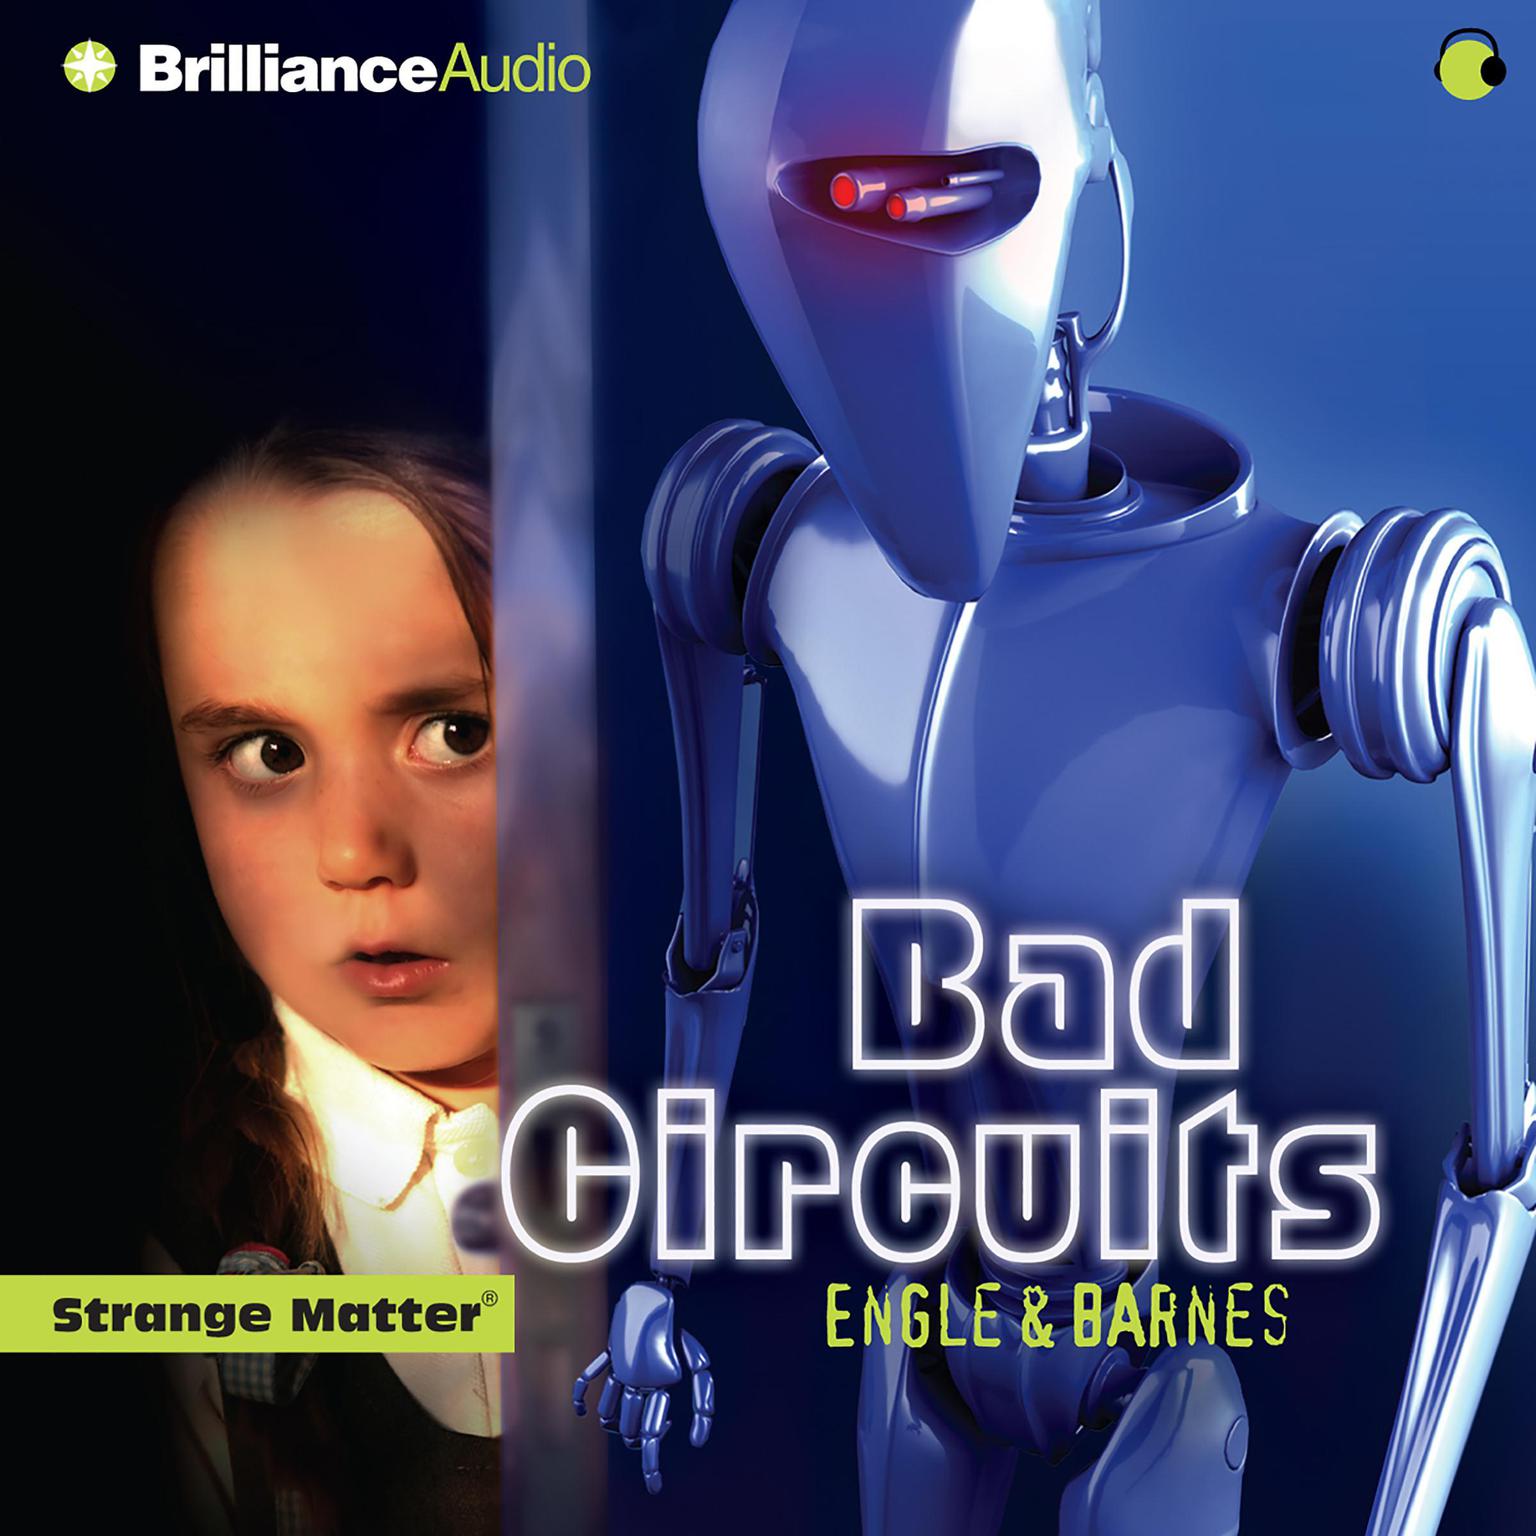 Bad Circuits (Abridged) Audiobook, by Engle 